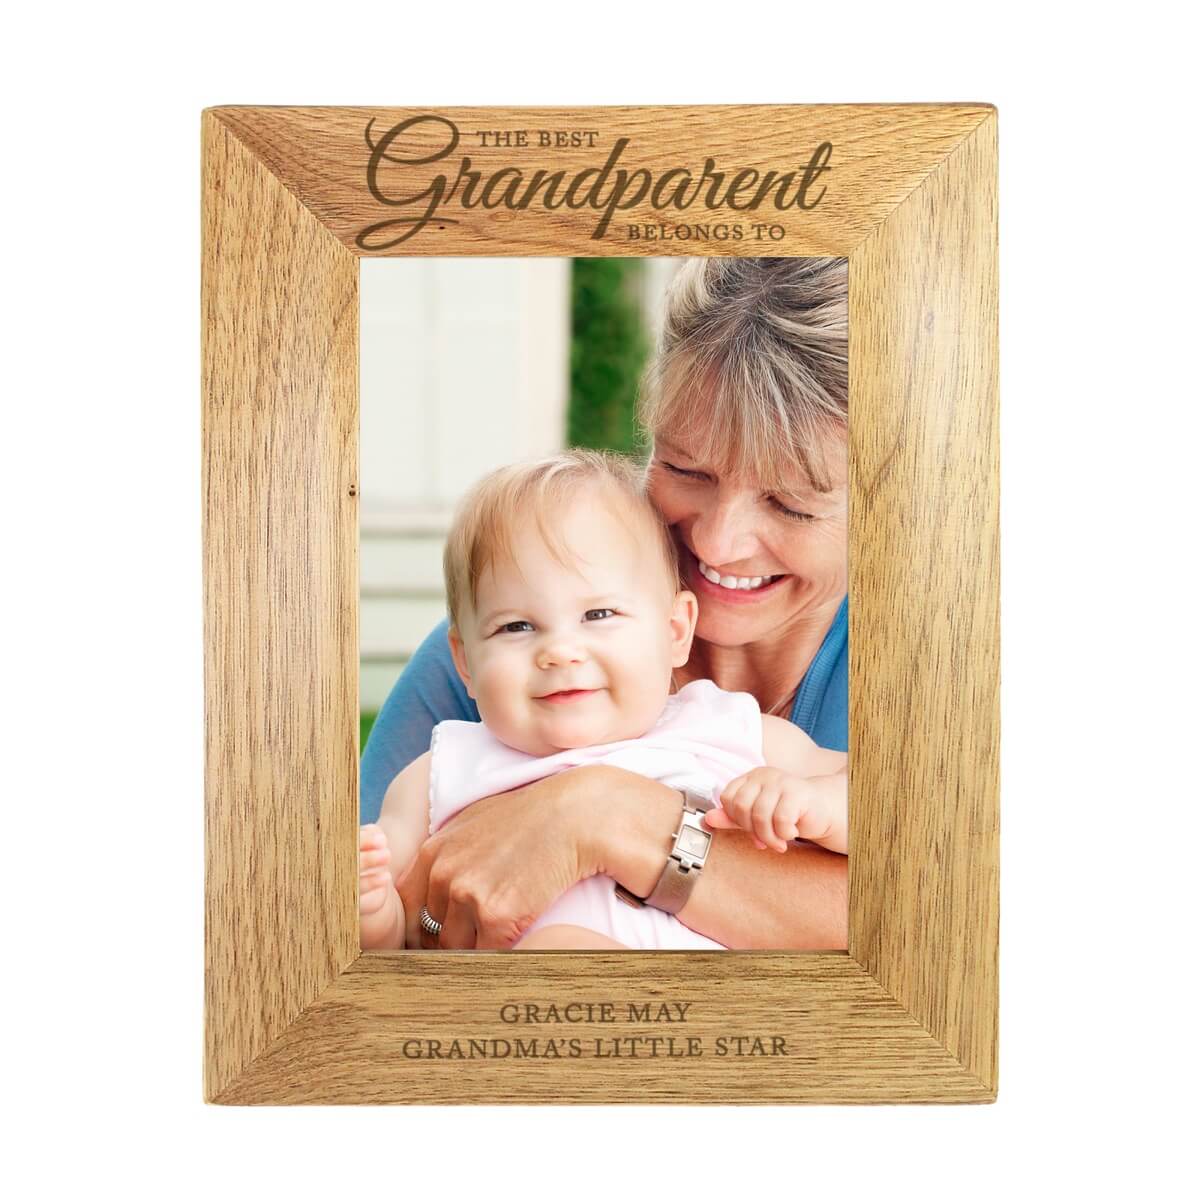 Personalised ‘The Best Grandparent’ 7×5 Wooden Photo Frame